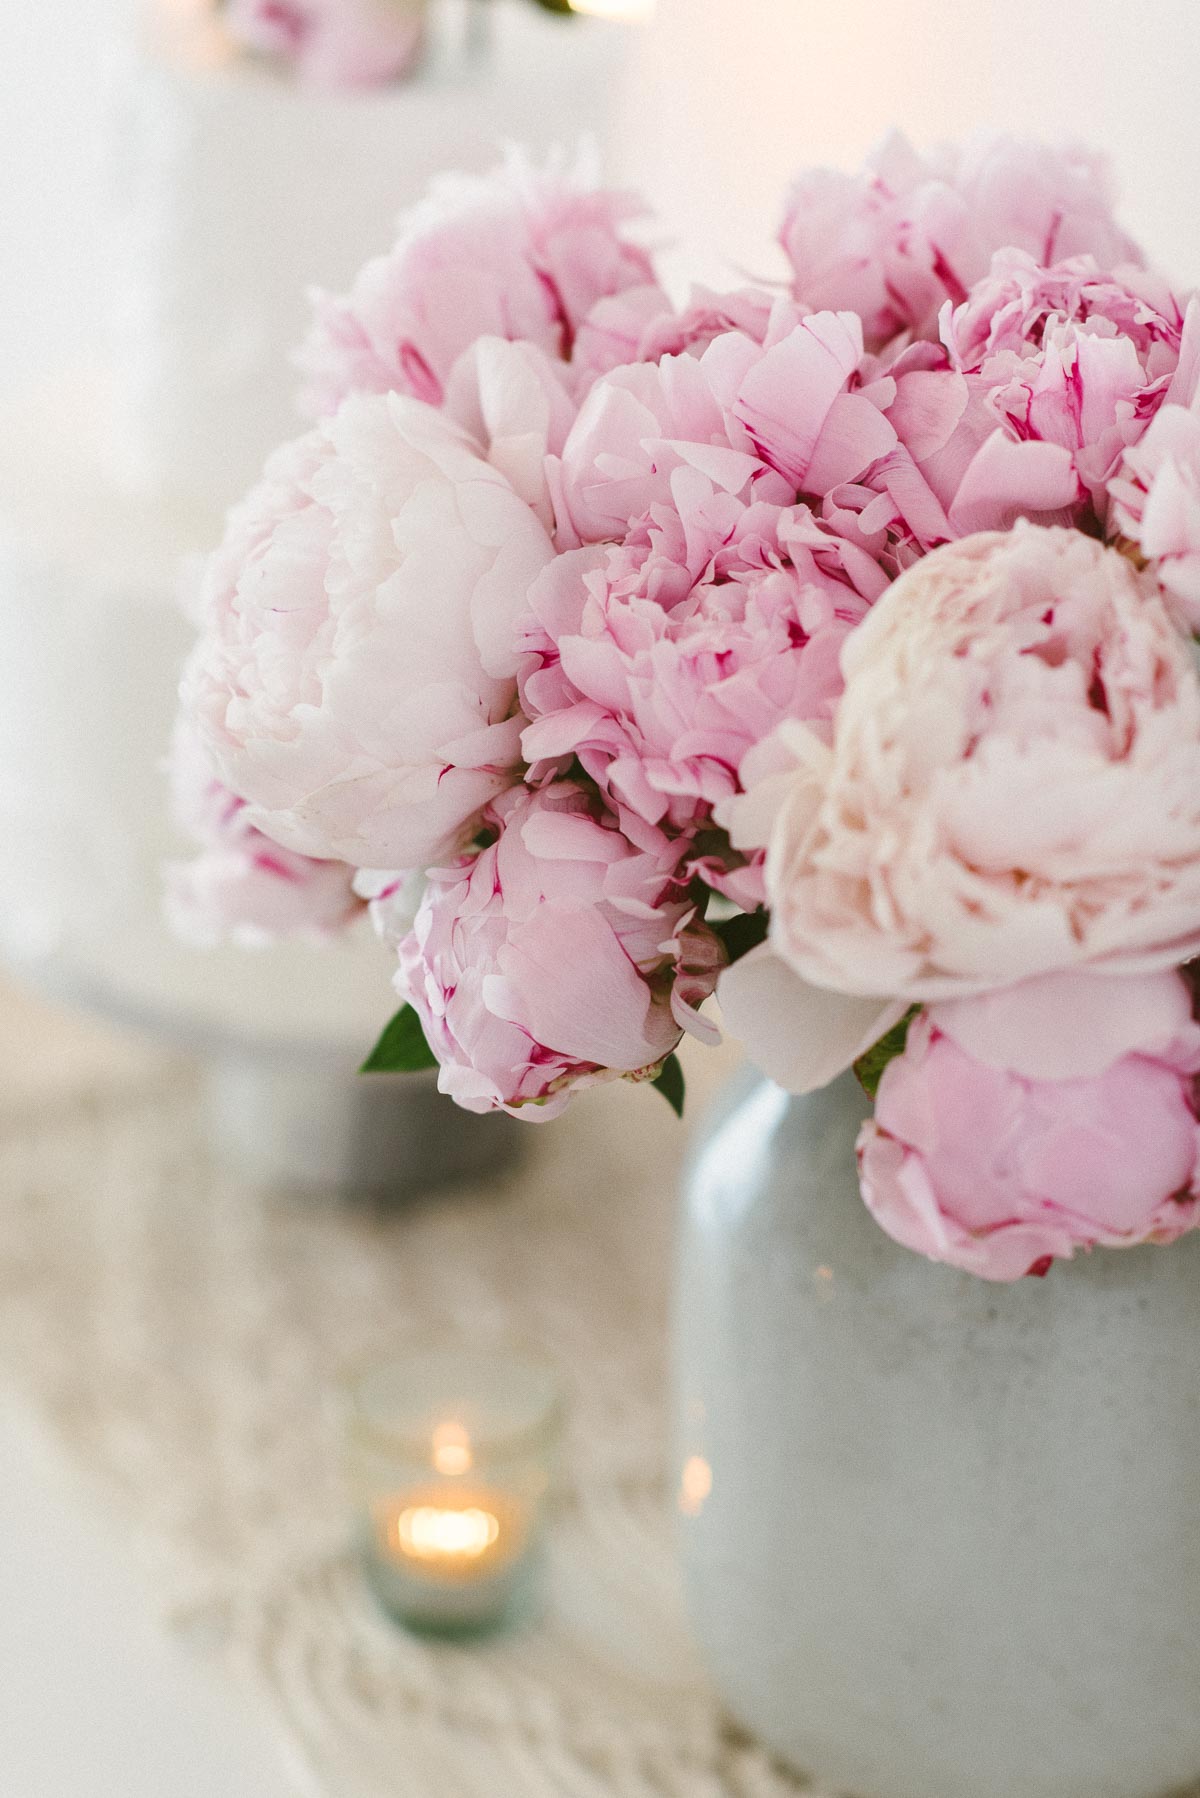 1646664908 196 Wedding decoration with peonies in an elegant boho style - Wedding decoration with peonies in an elegant boho style